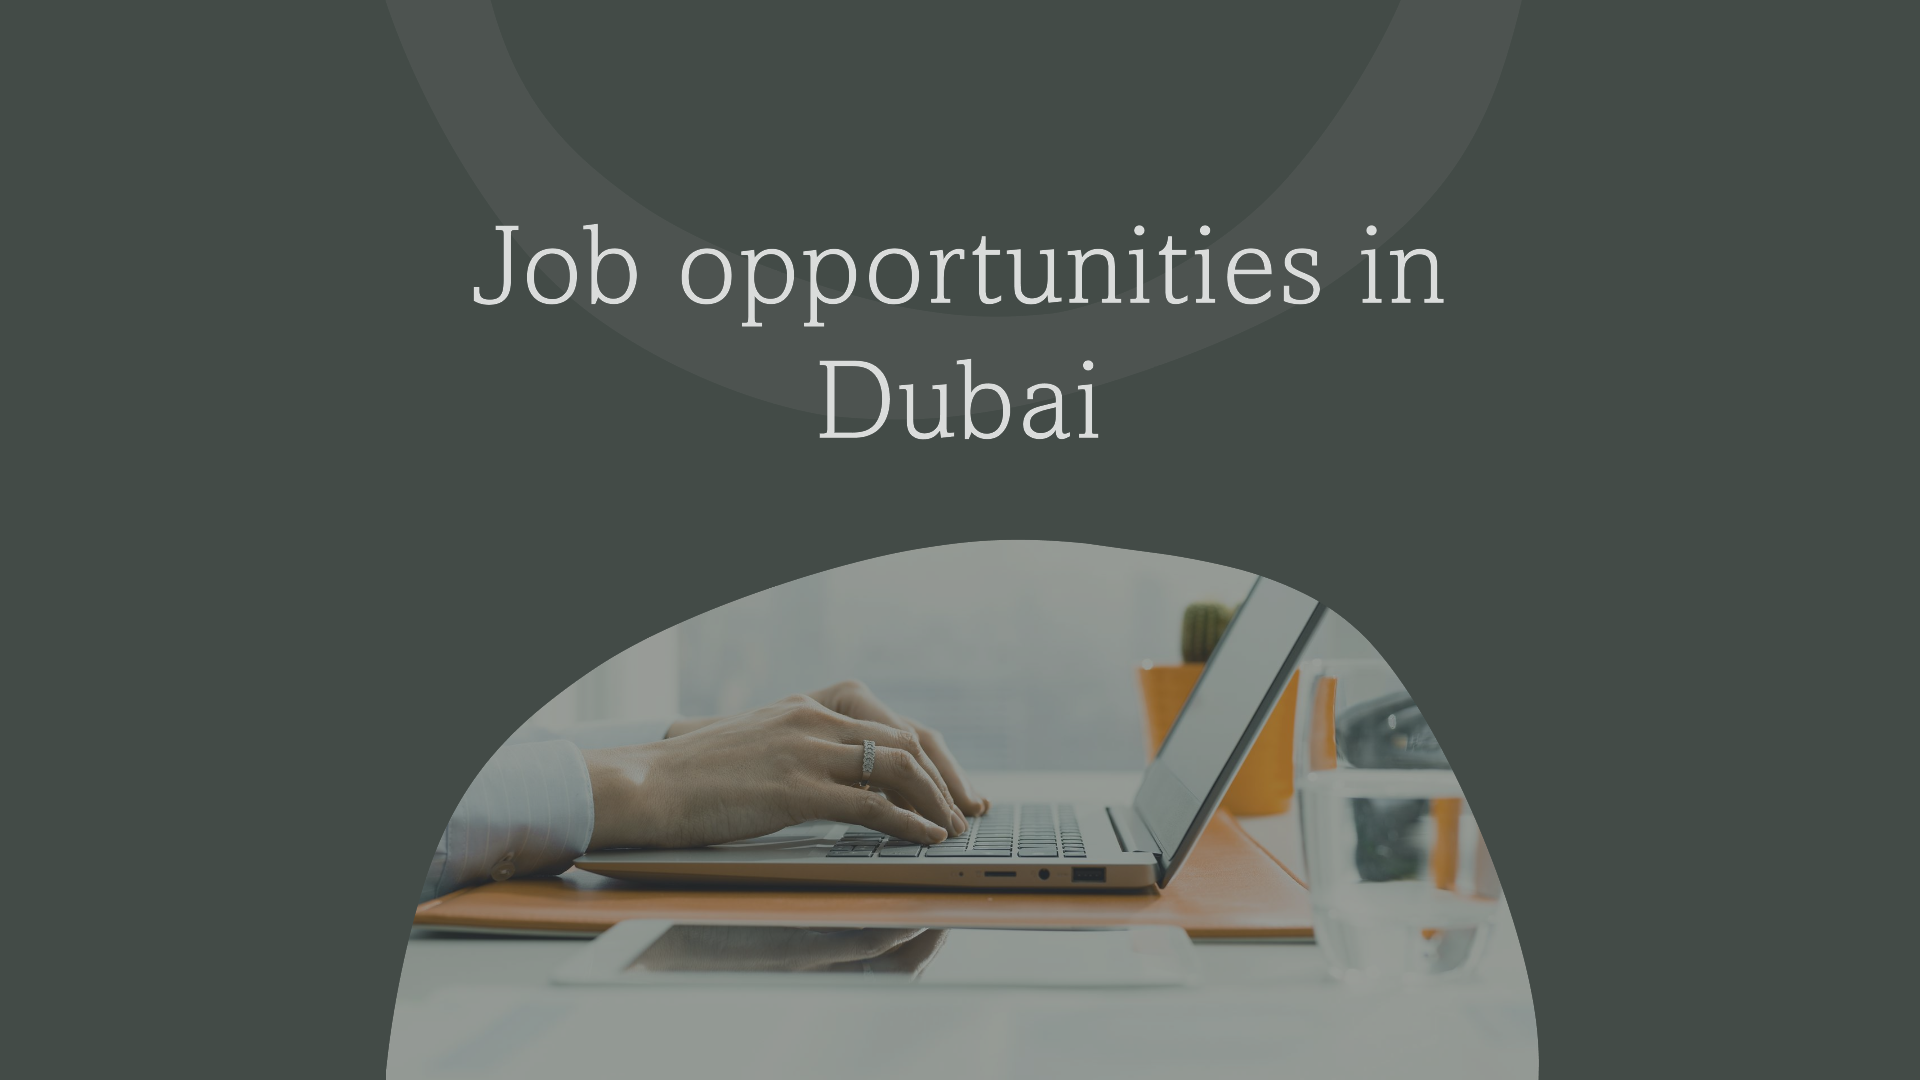 Job opportunities in Dubai for Arabic and English speakers